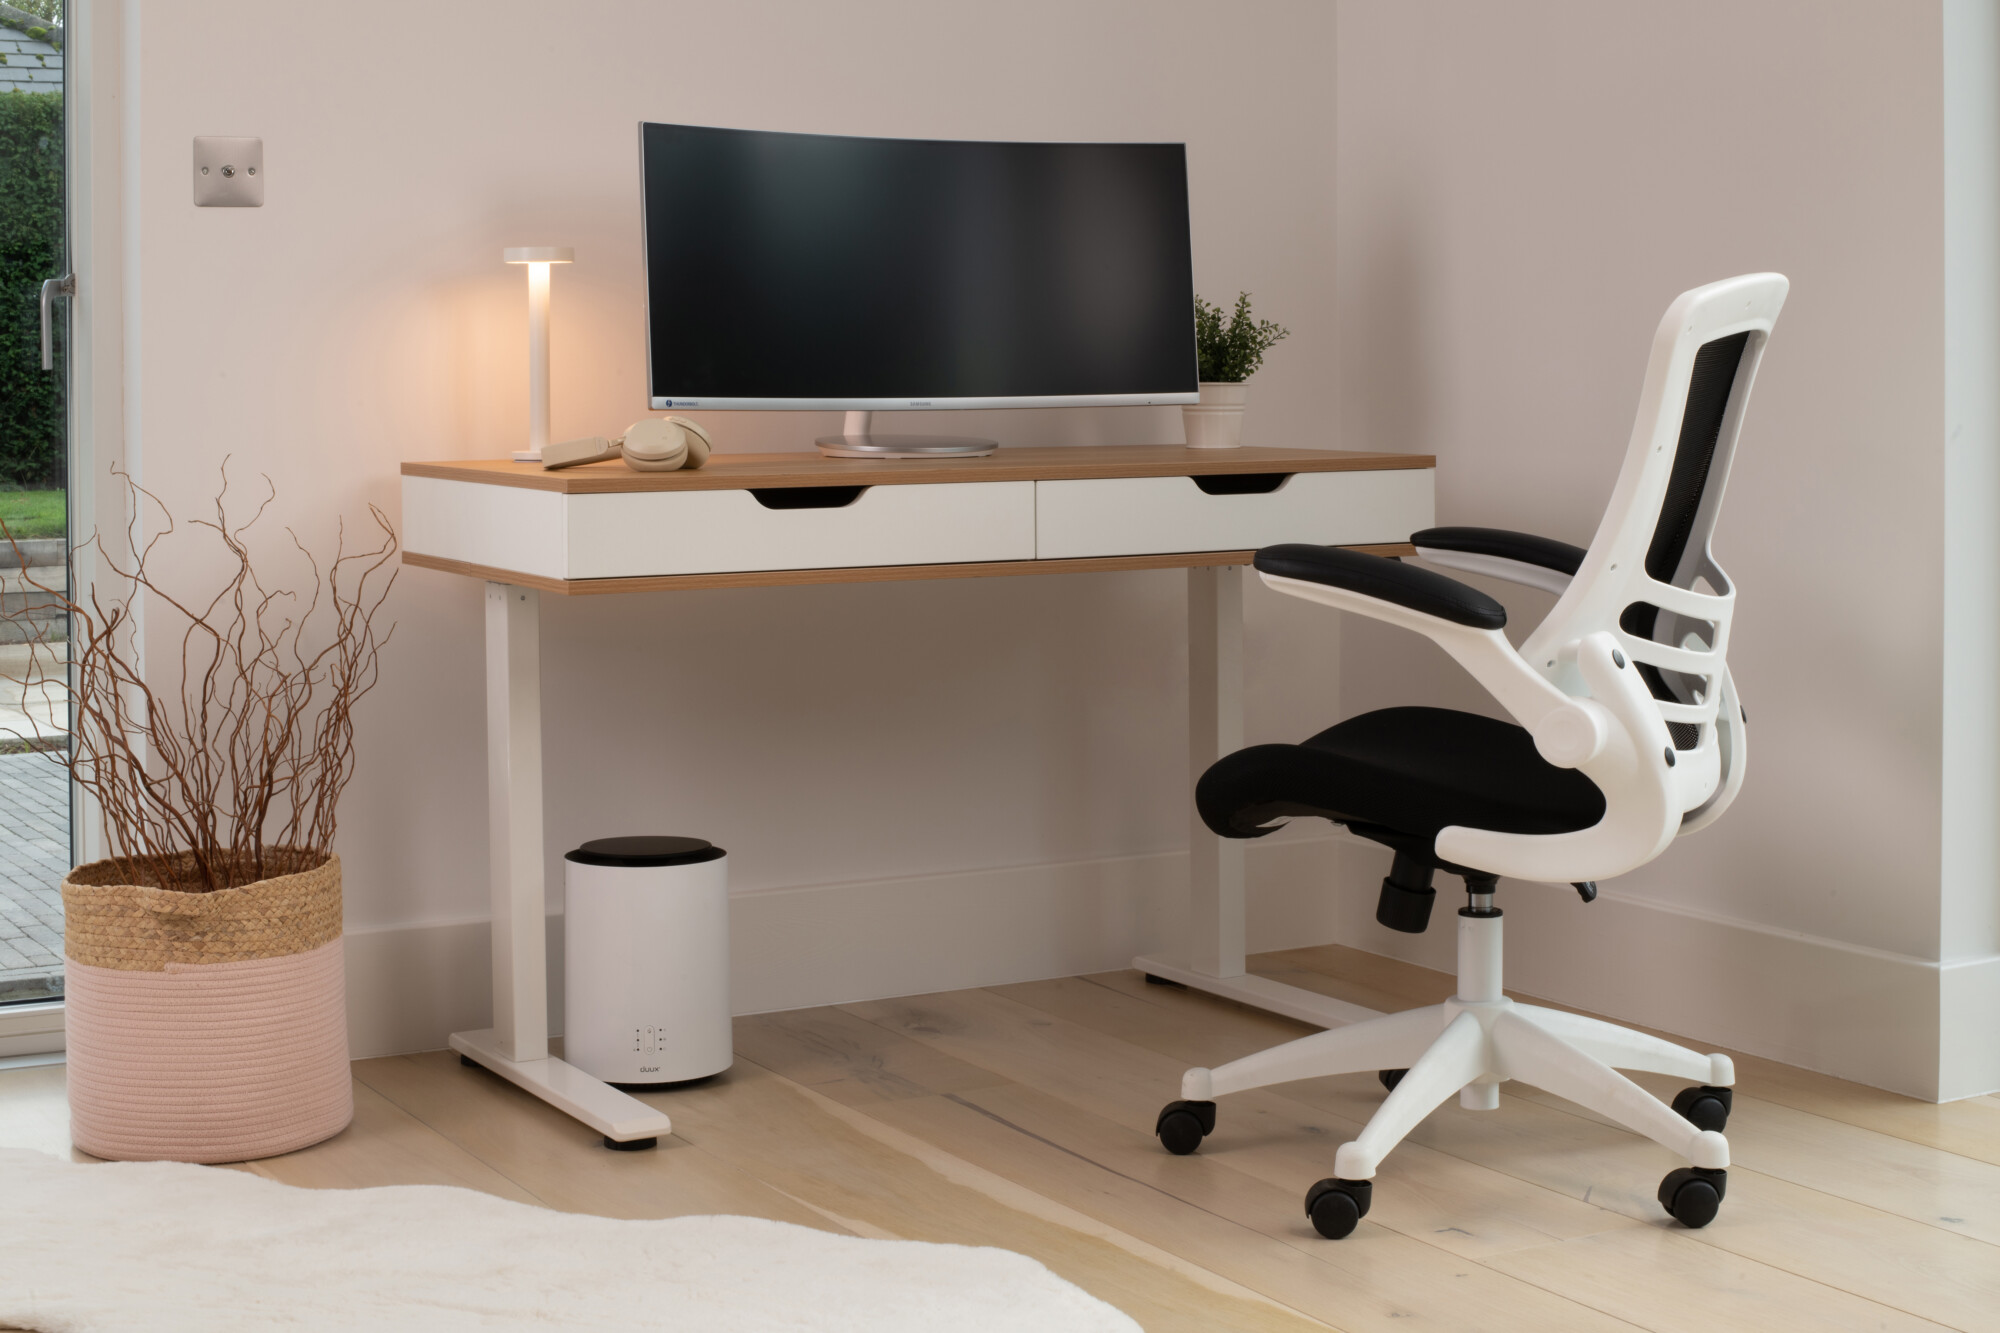 The Ola Height Adjustable Desk With Drawers from Koble Designs, a stylish and modern design that combines maple wood and classic white to create an elegant piece of furniture for your home’s aesthetic. 